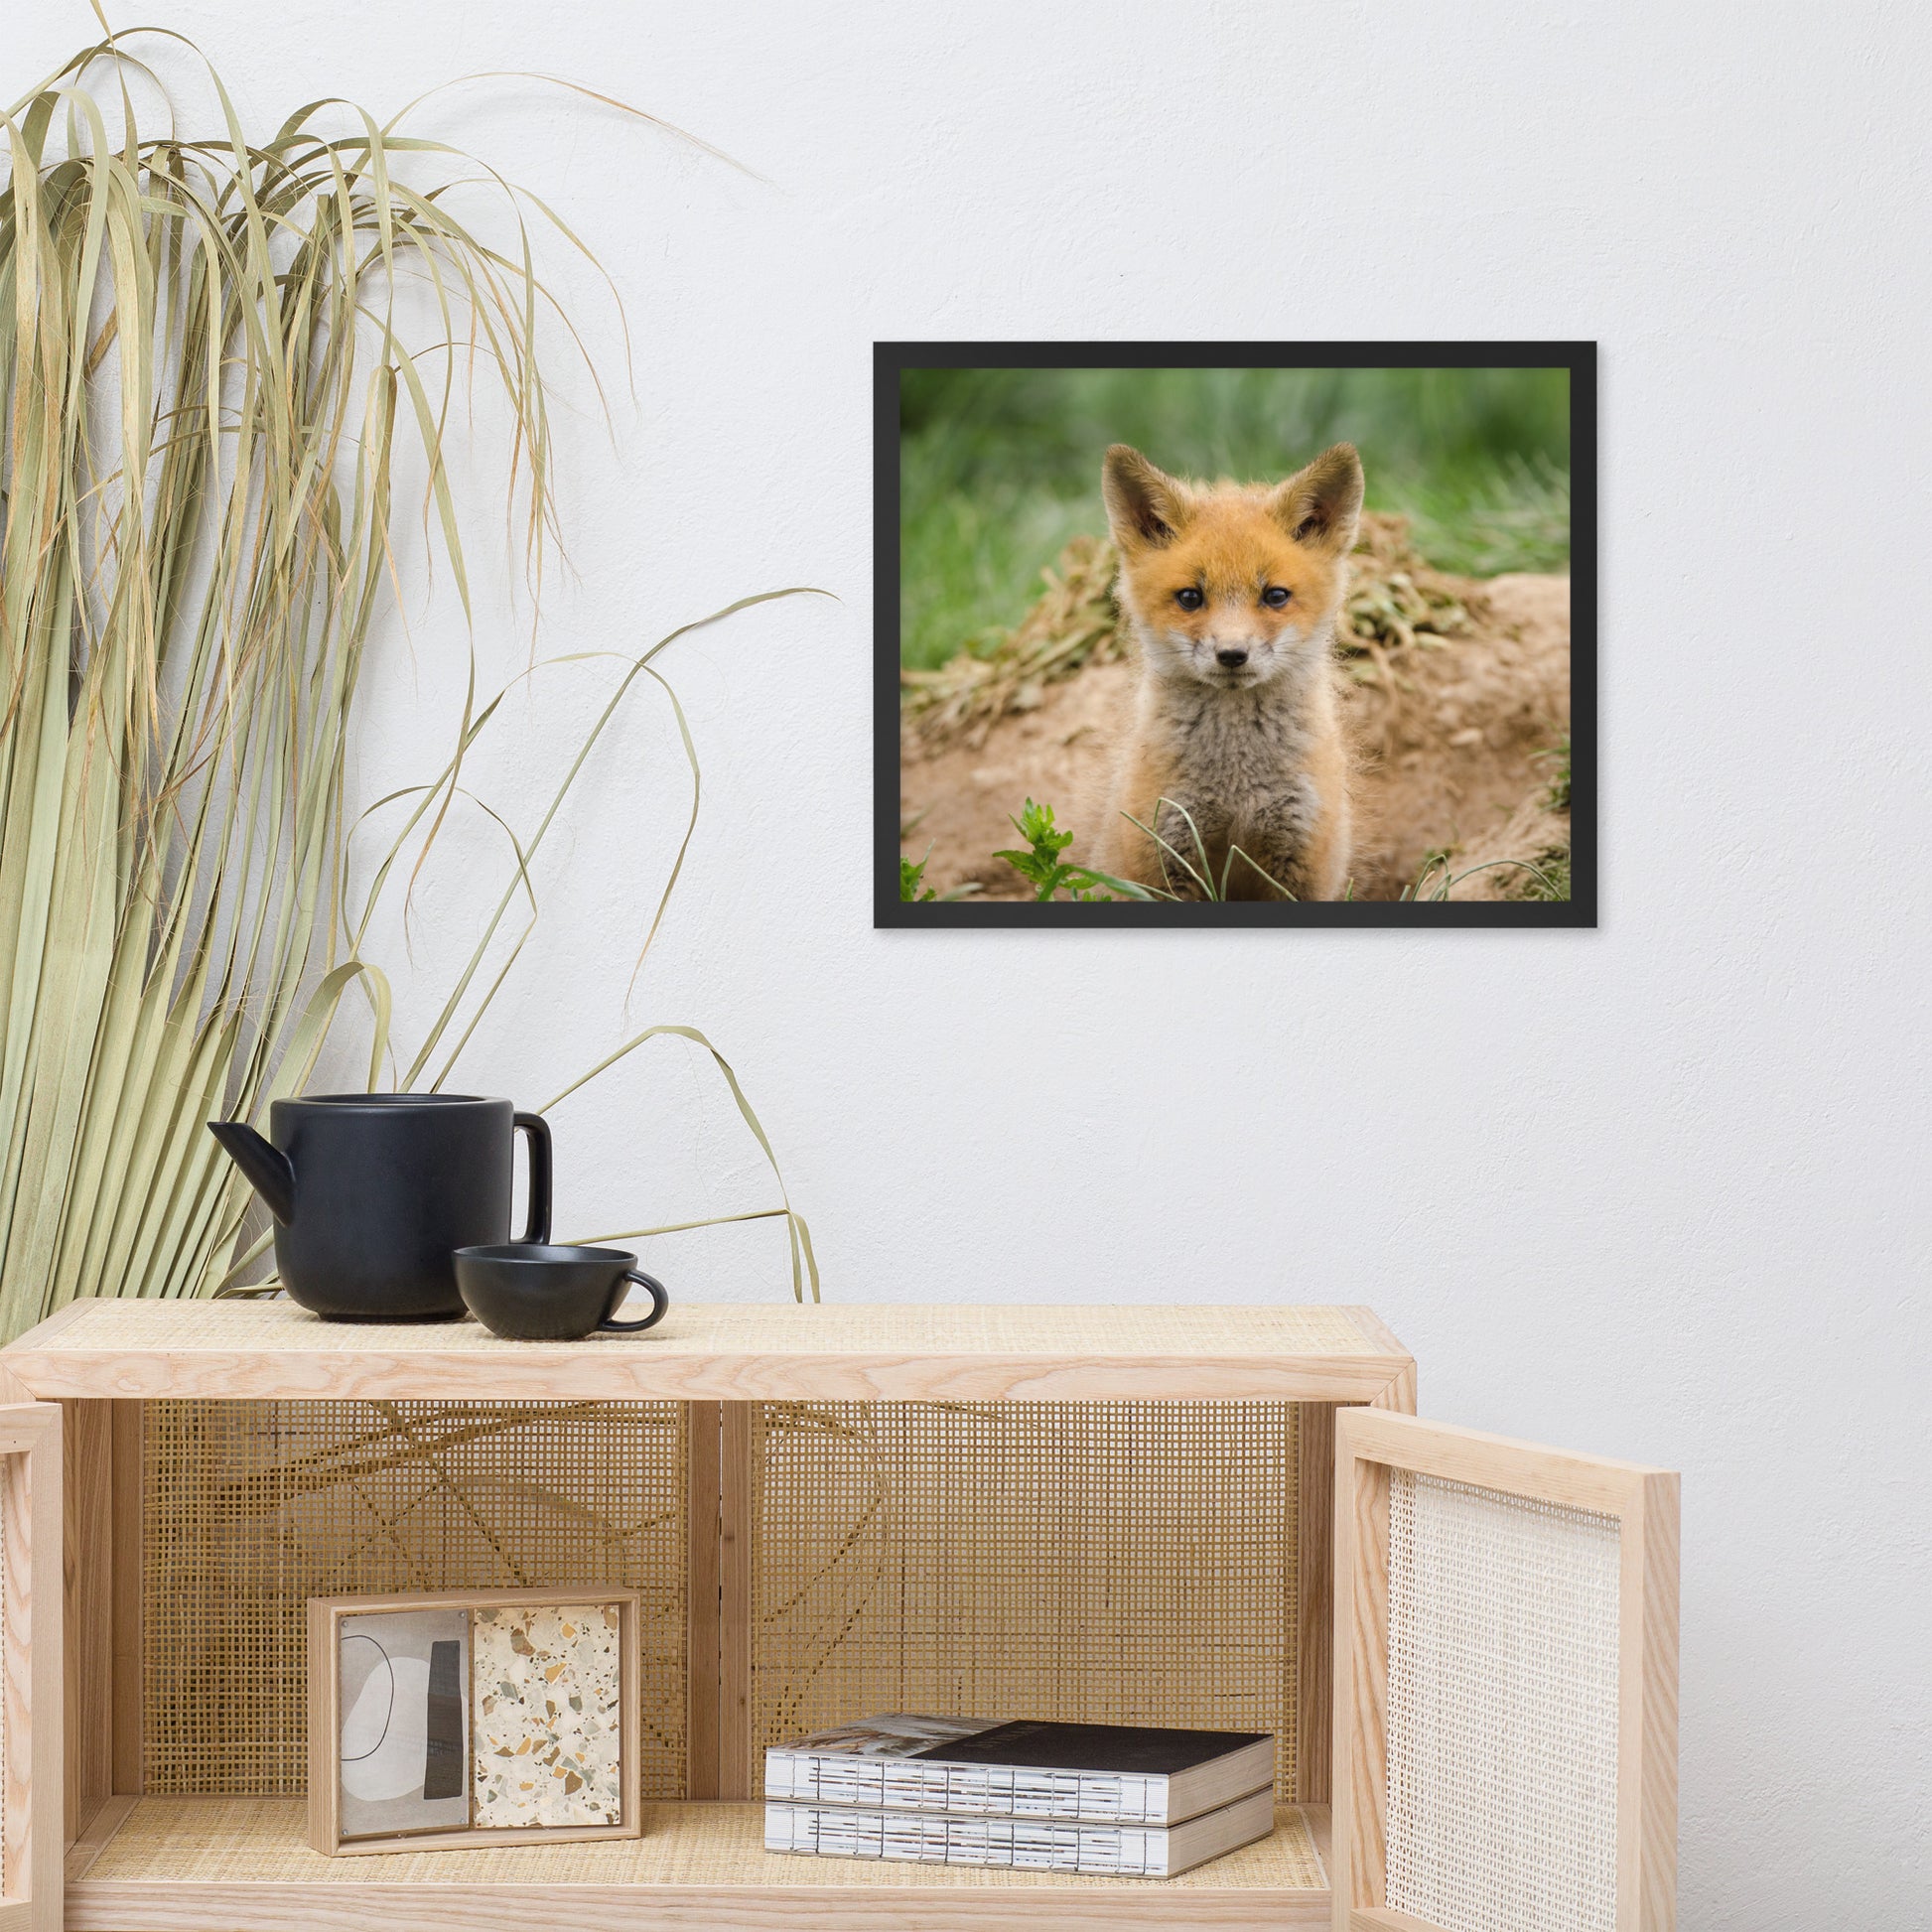 Pretty Bathroom Pictures: Baby Young Red Fox Kit/ Animal / Wildlife / Nature Photographic Artwork - Framed Artwork - Wall Decor